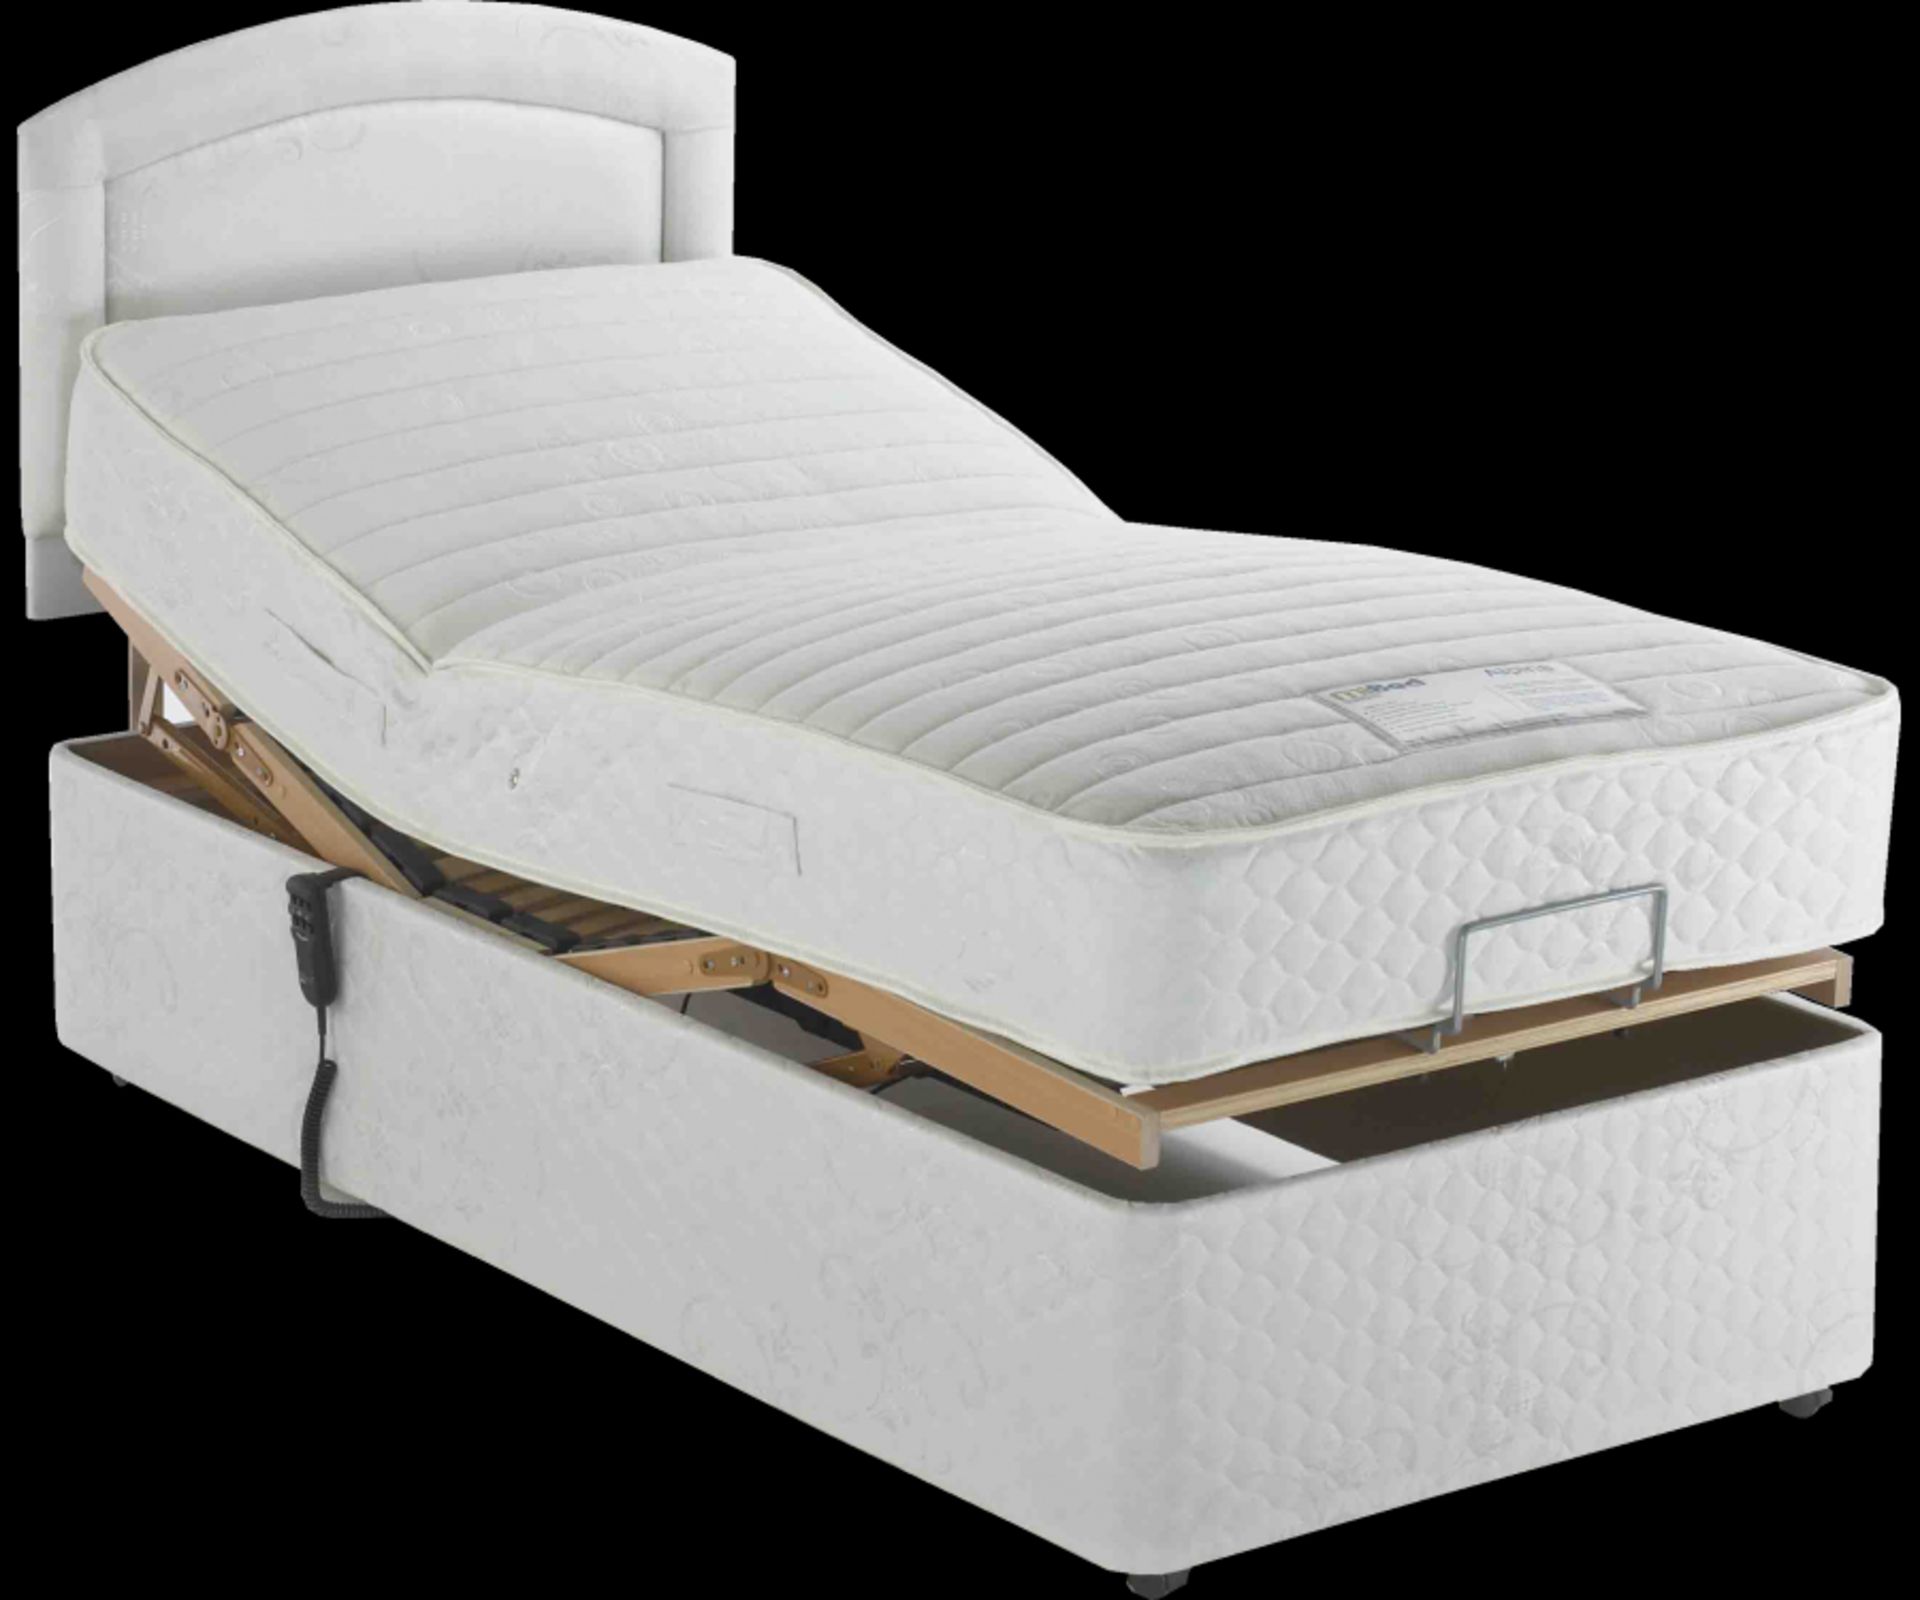 Brand New 2'6 (Small Single) Electric Adjustable Bed With Pocket Sprung Mattress